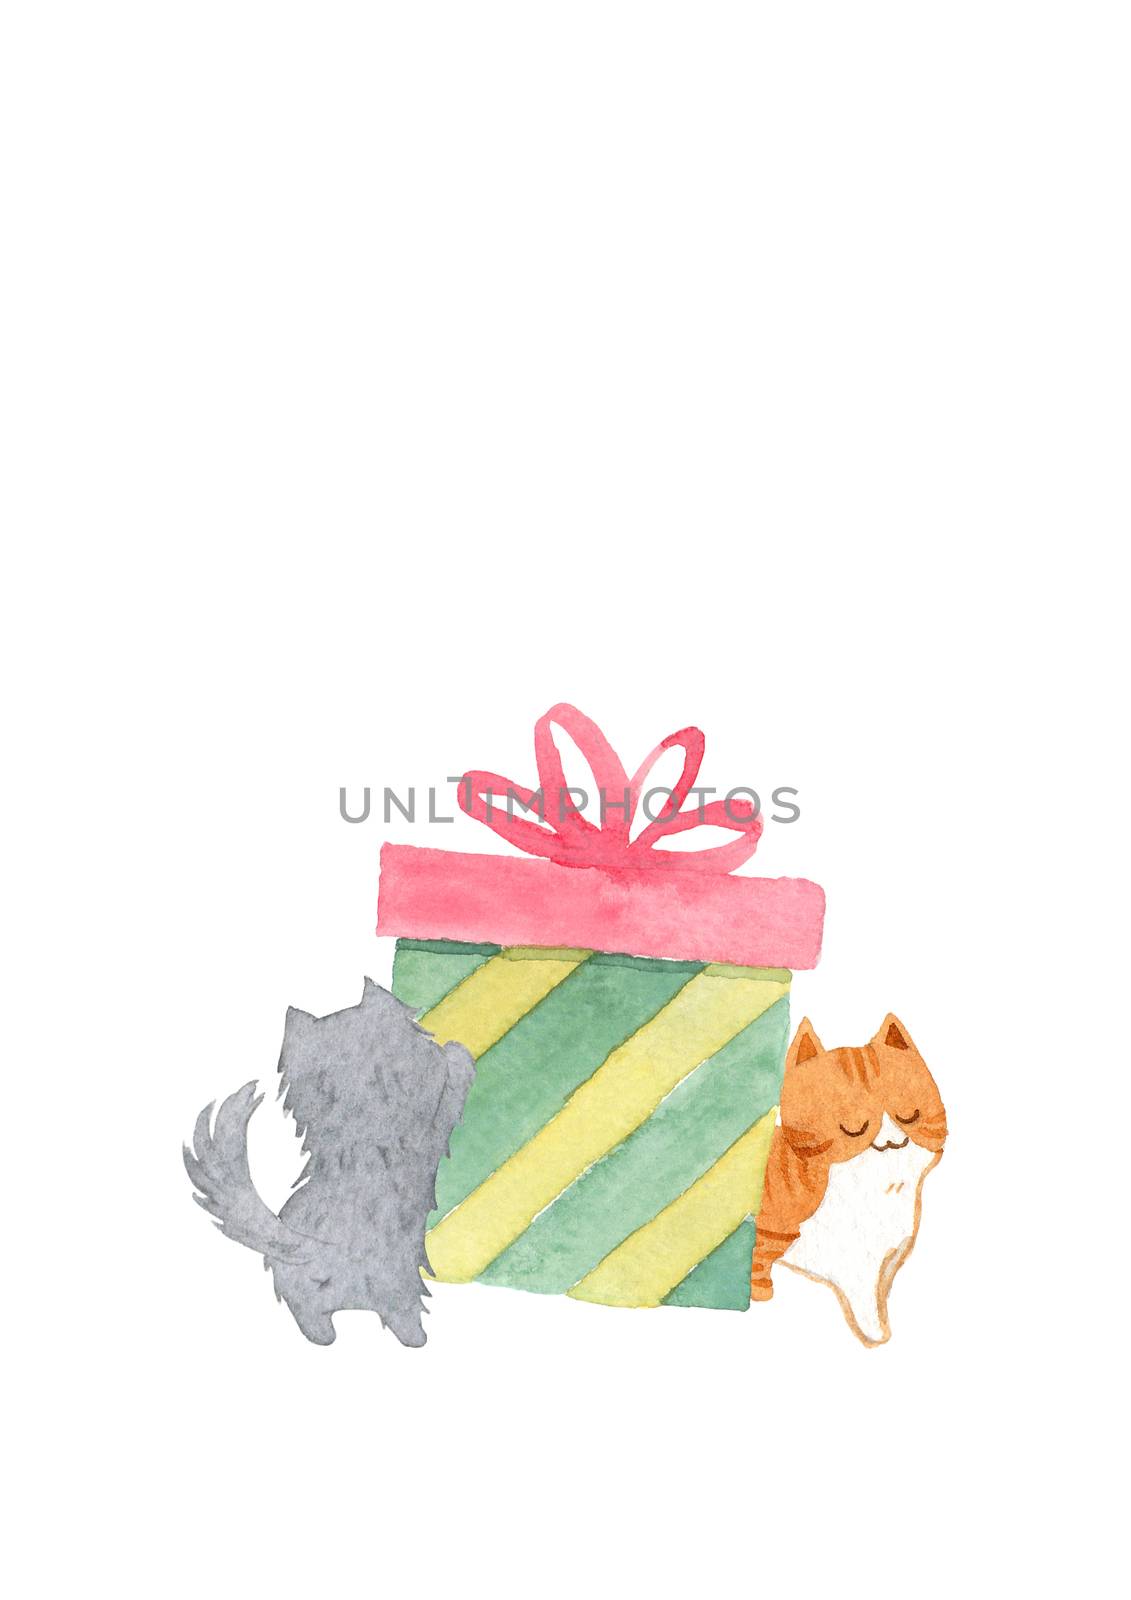 The cat is pushing the gift box. Watercolor hand painting illustration on white background. Copy space for your text. Design for greeting cards, gift cards, Christmas, New year, pet advertising. by Ungamrung